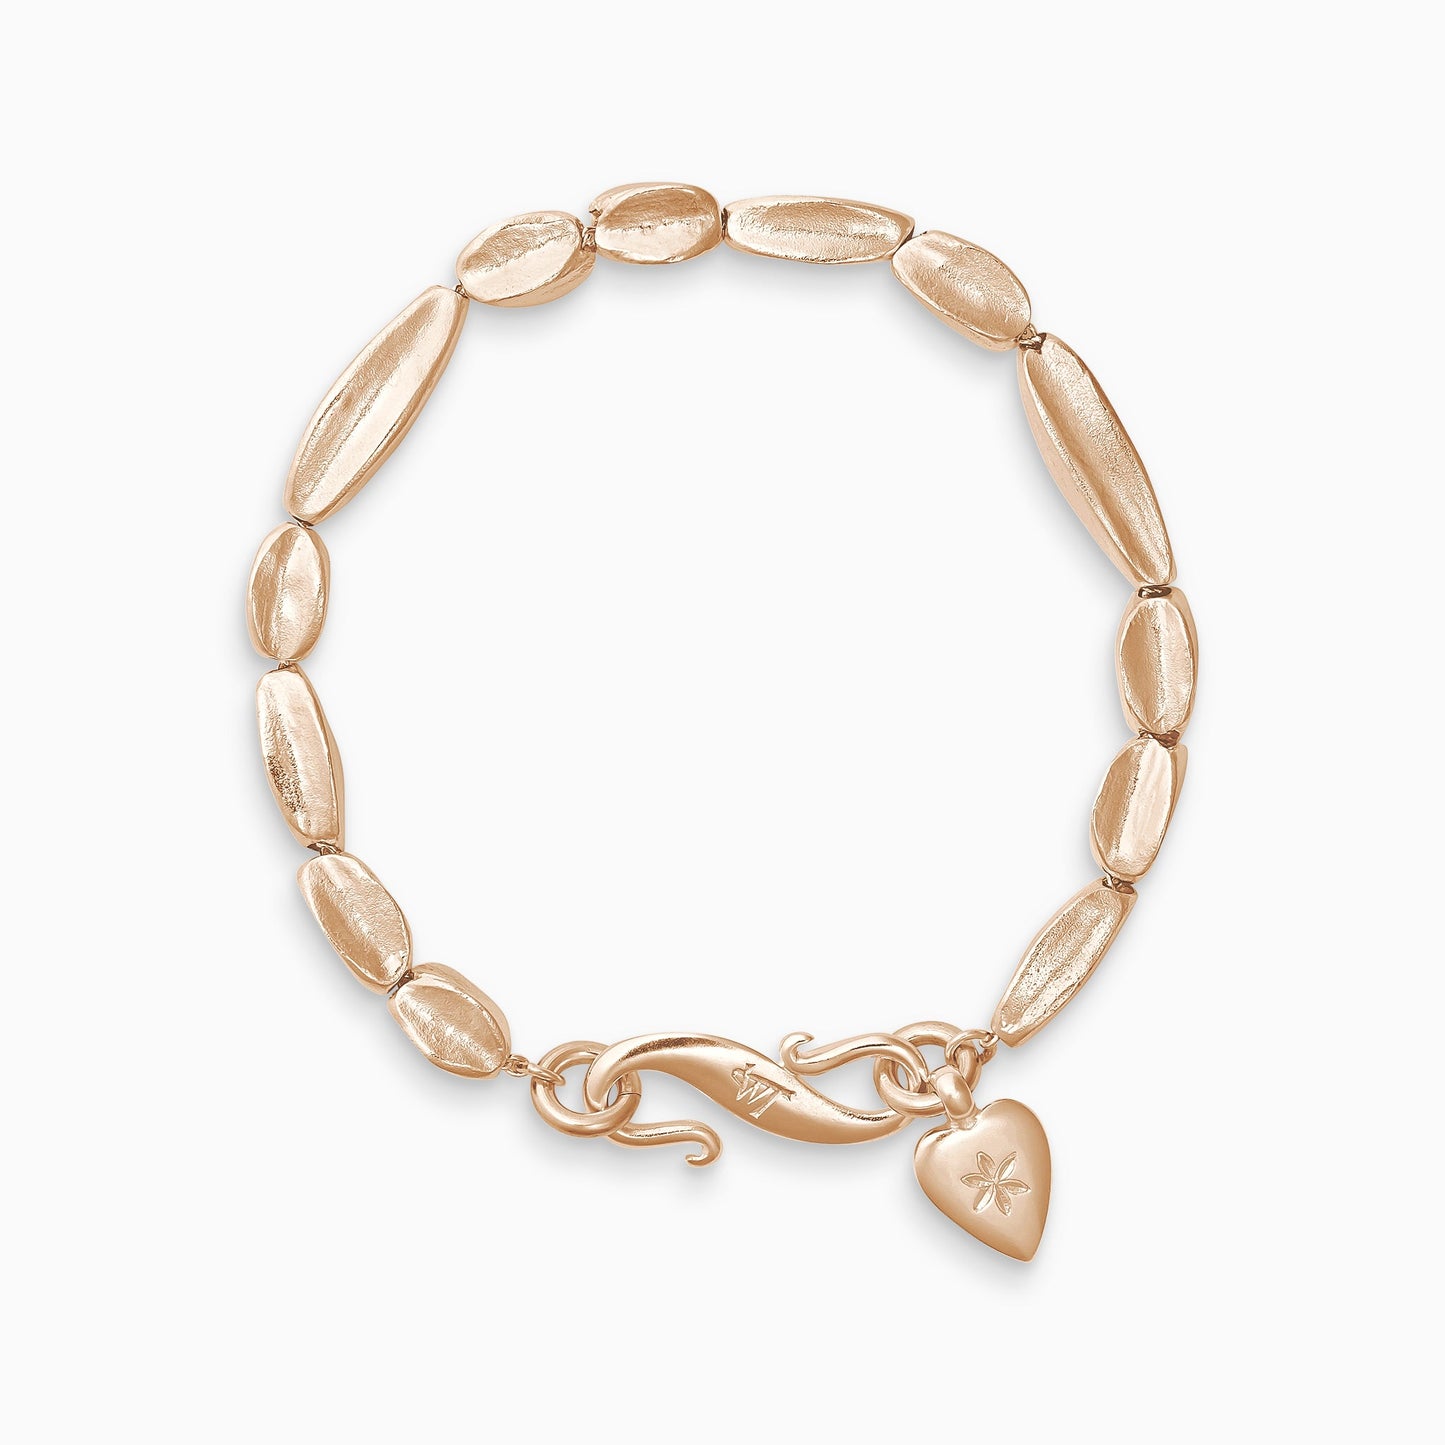 An 18ct Fairtrade rose gold bracelet of handmade organic, concave, square section textured ‘Baluba’ beads. Finished with a smooth heart shaped charm, engraved with a 6 petal flower and our signature ’S’ clasp. Bracelet length 190mm. Beads varying lengths from 10mm to 40mm. Cross section of each bead approximately 6mm.